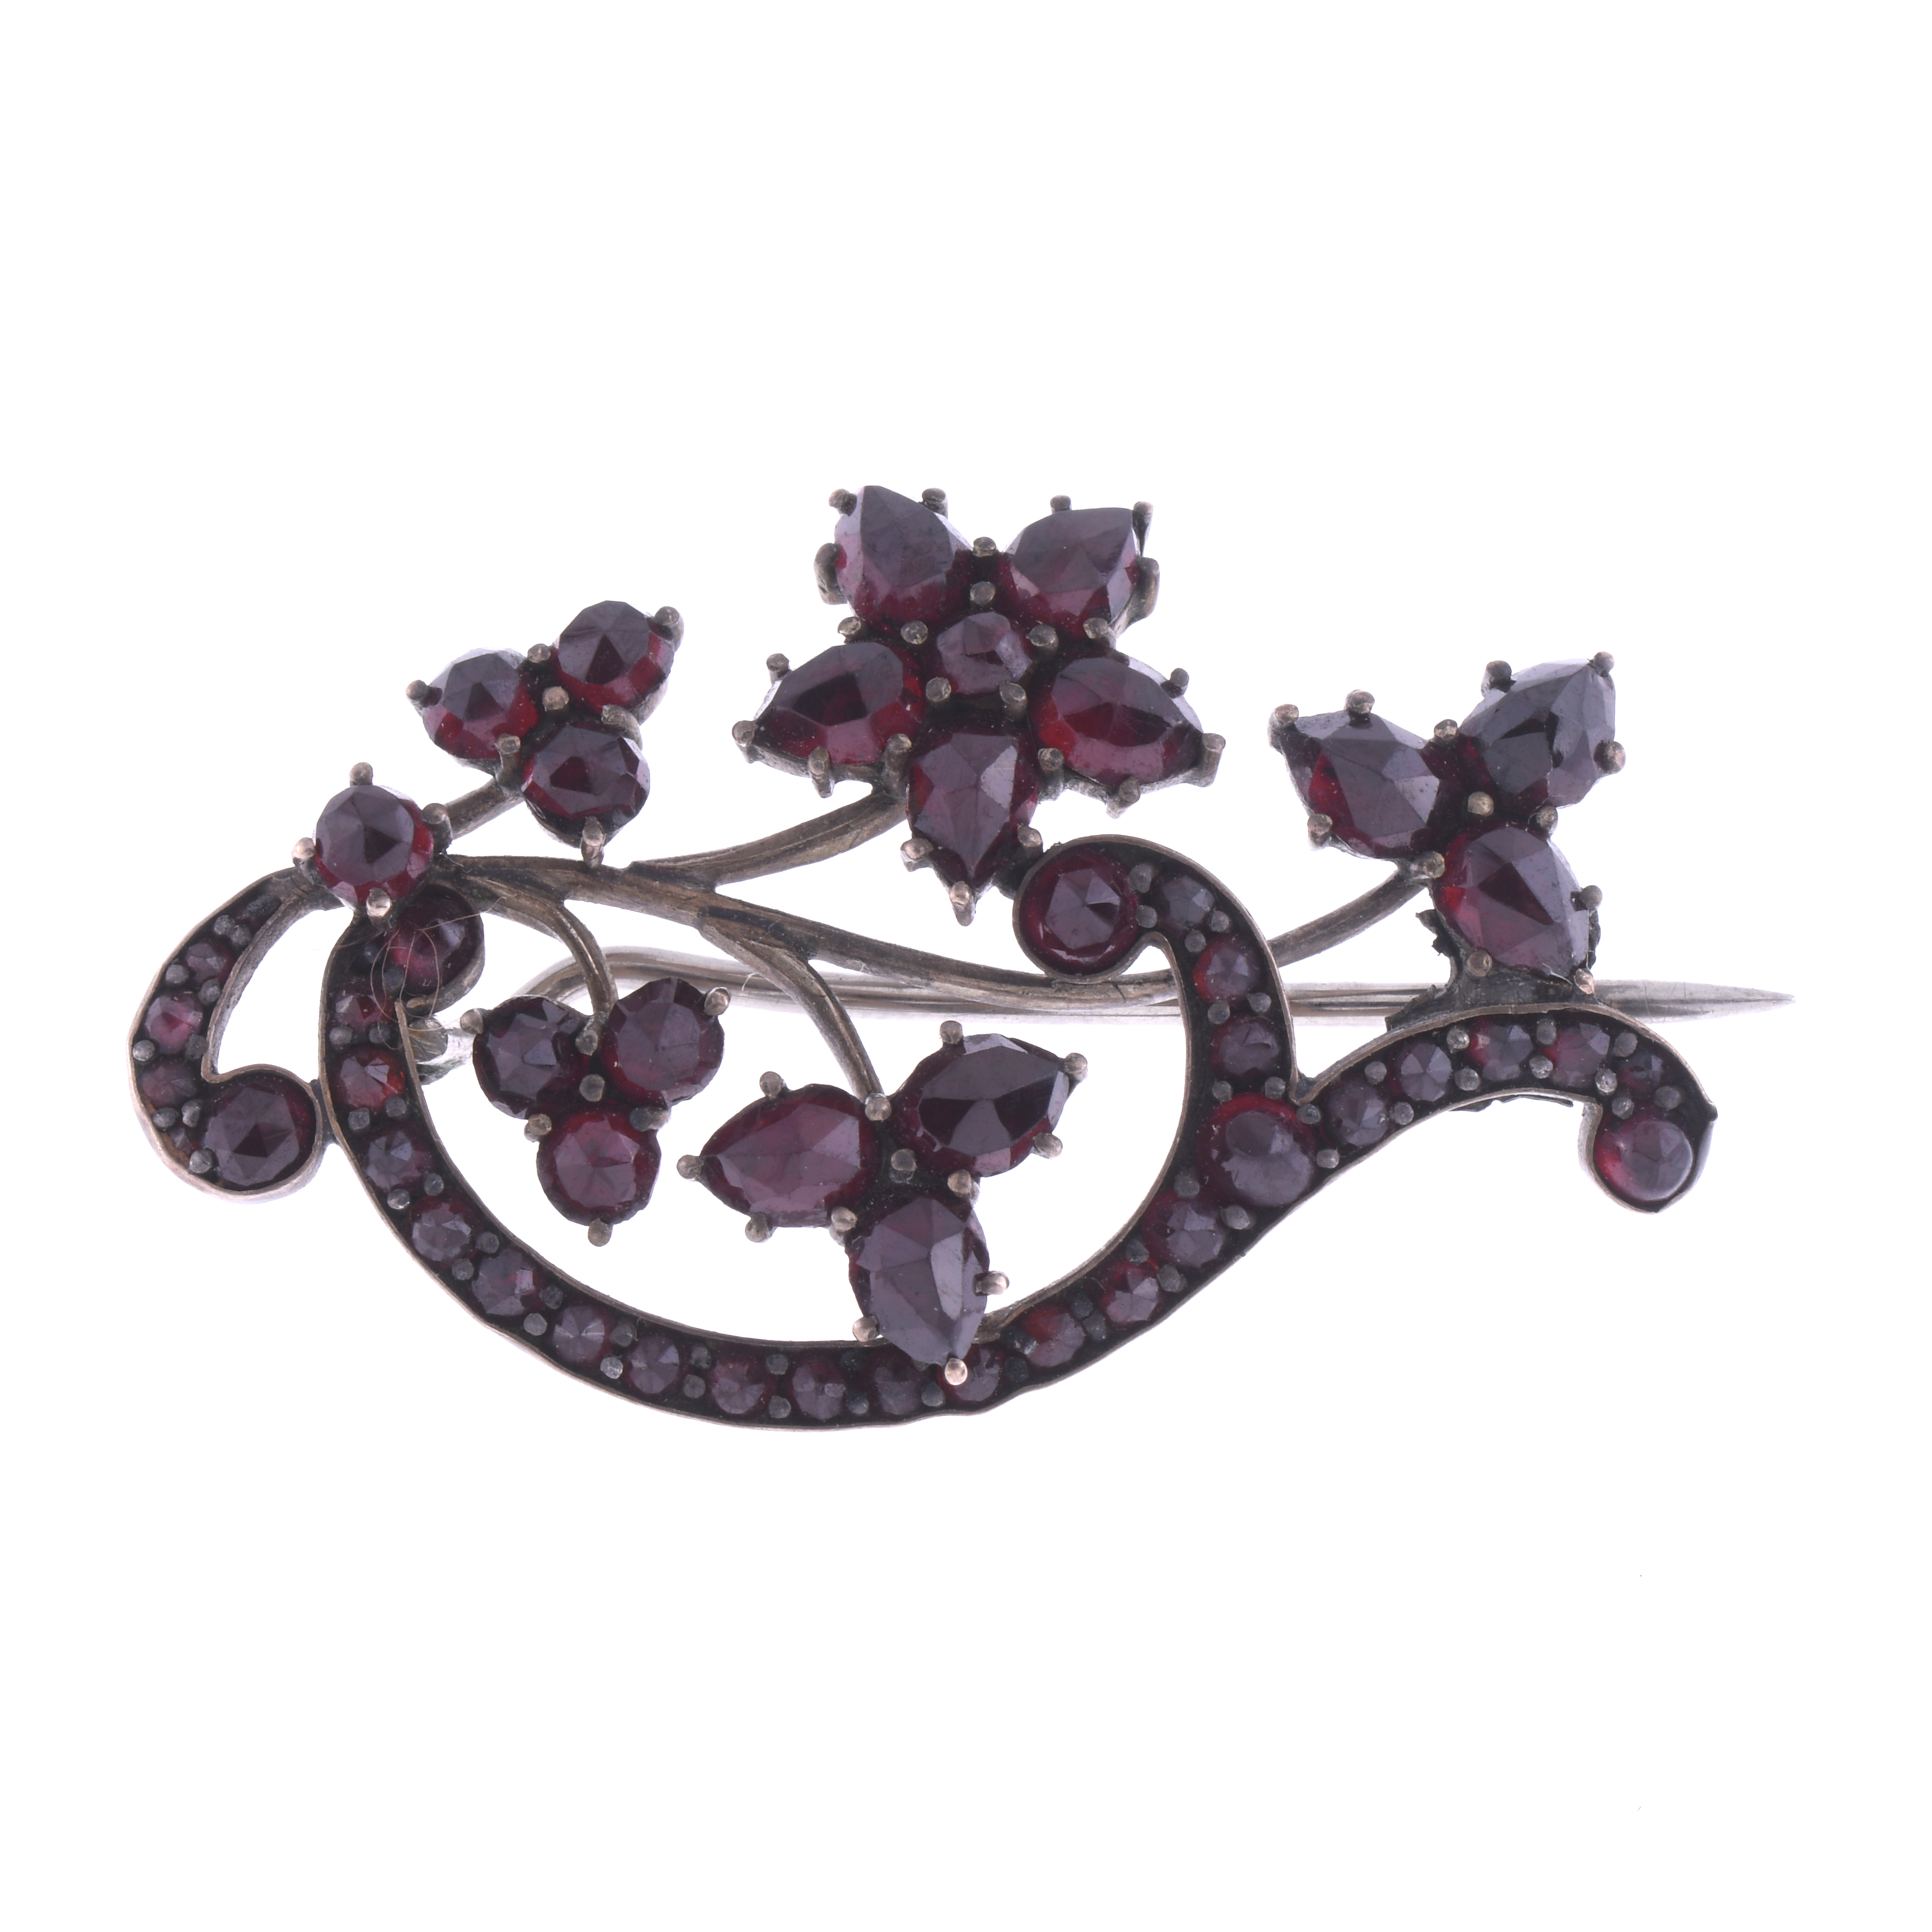 FLORAL BROOCH WITH GARNETS.